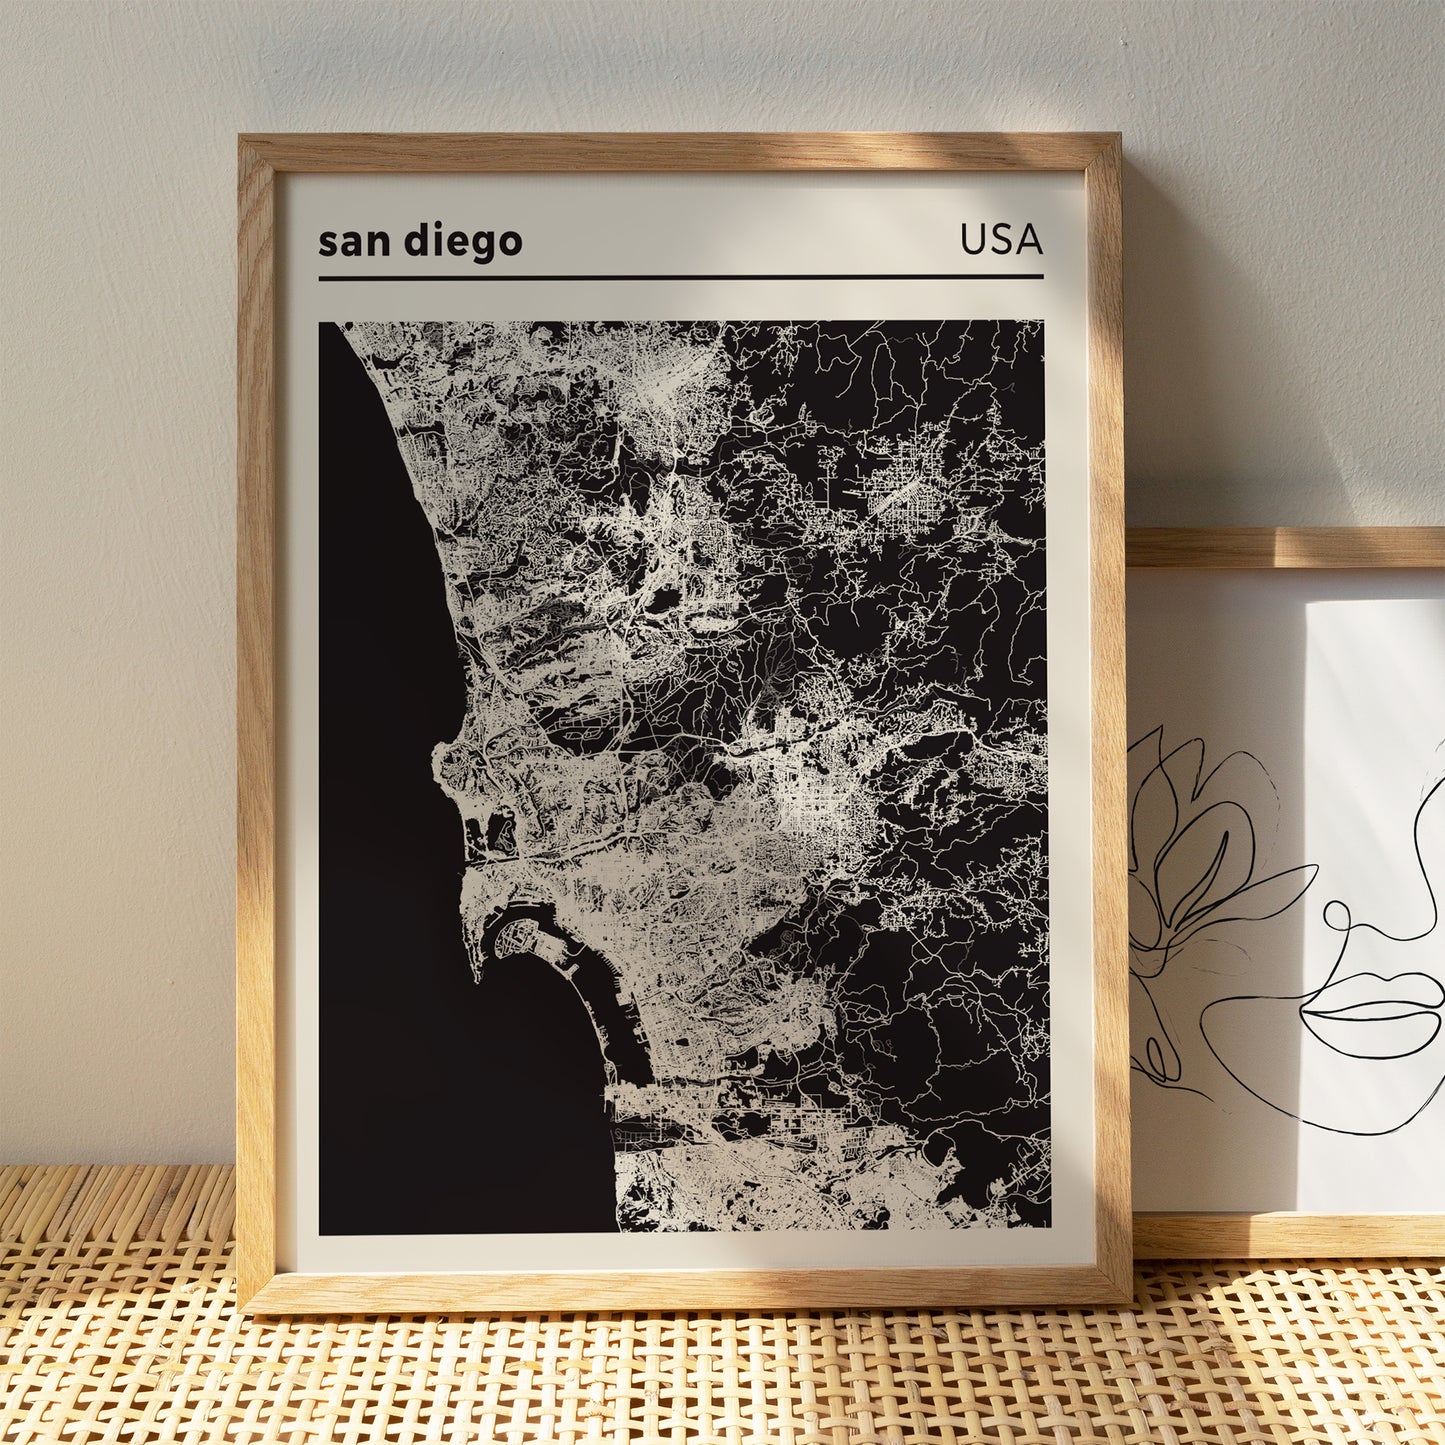 San Diego City Map Poster - USA